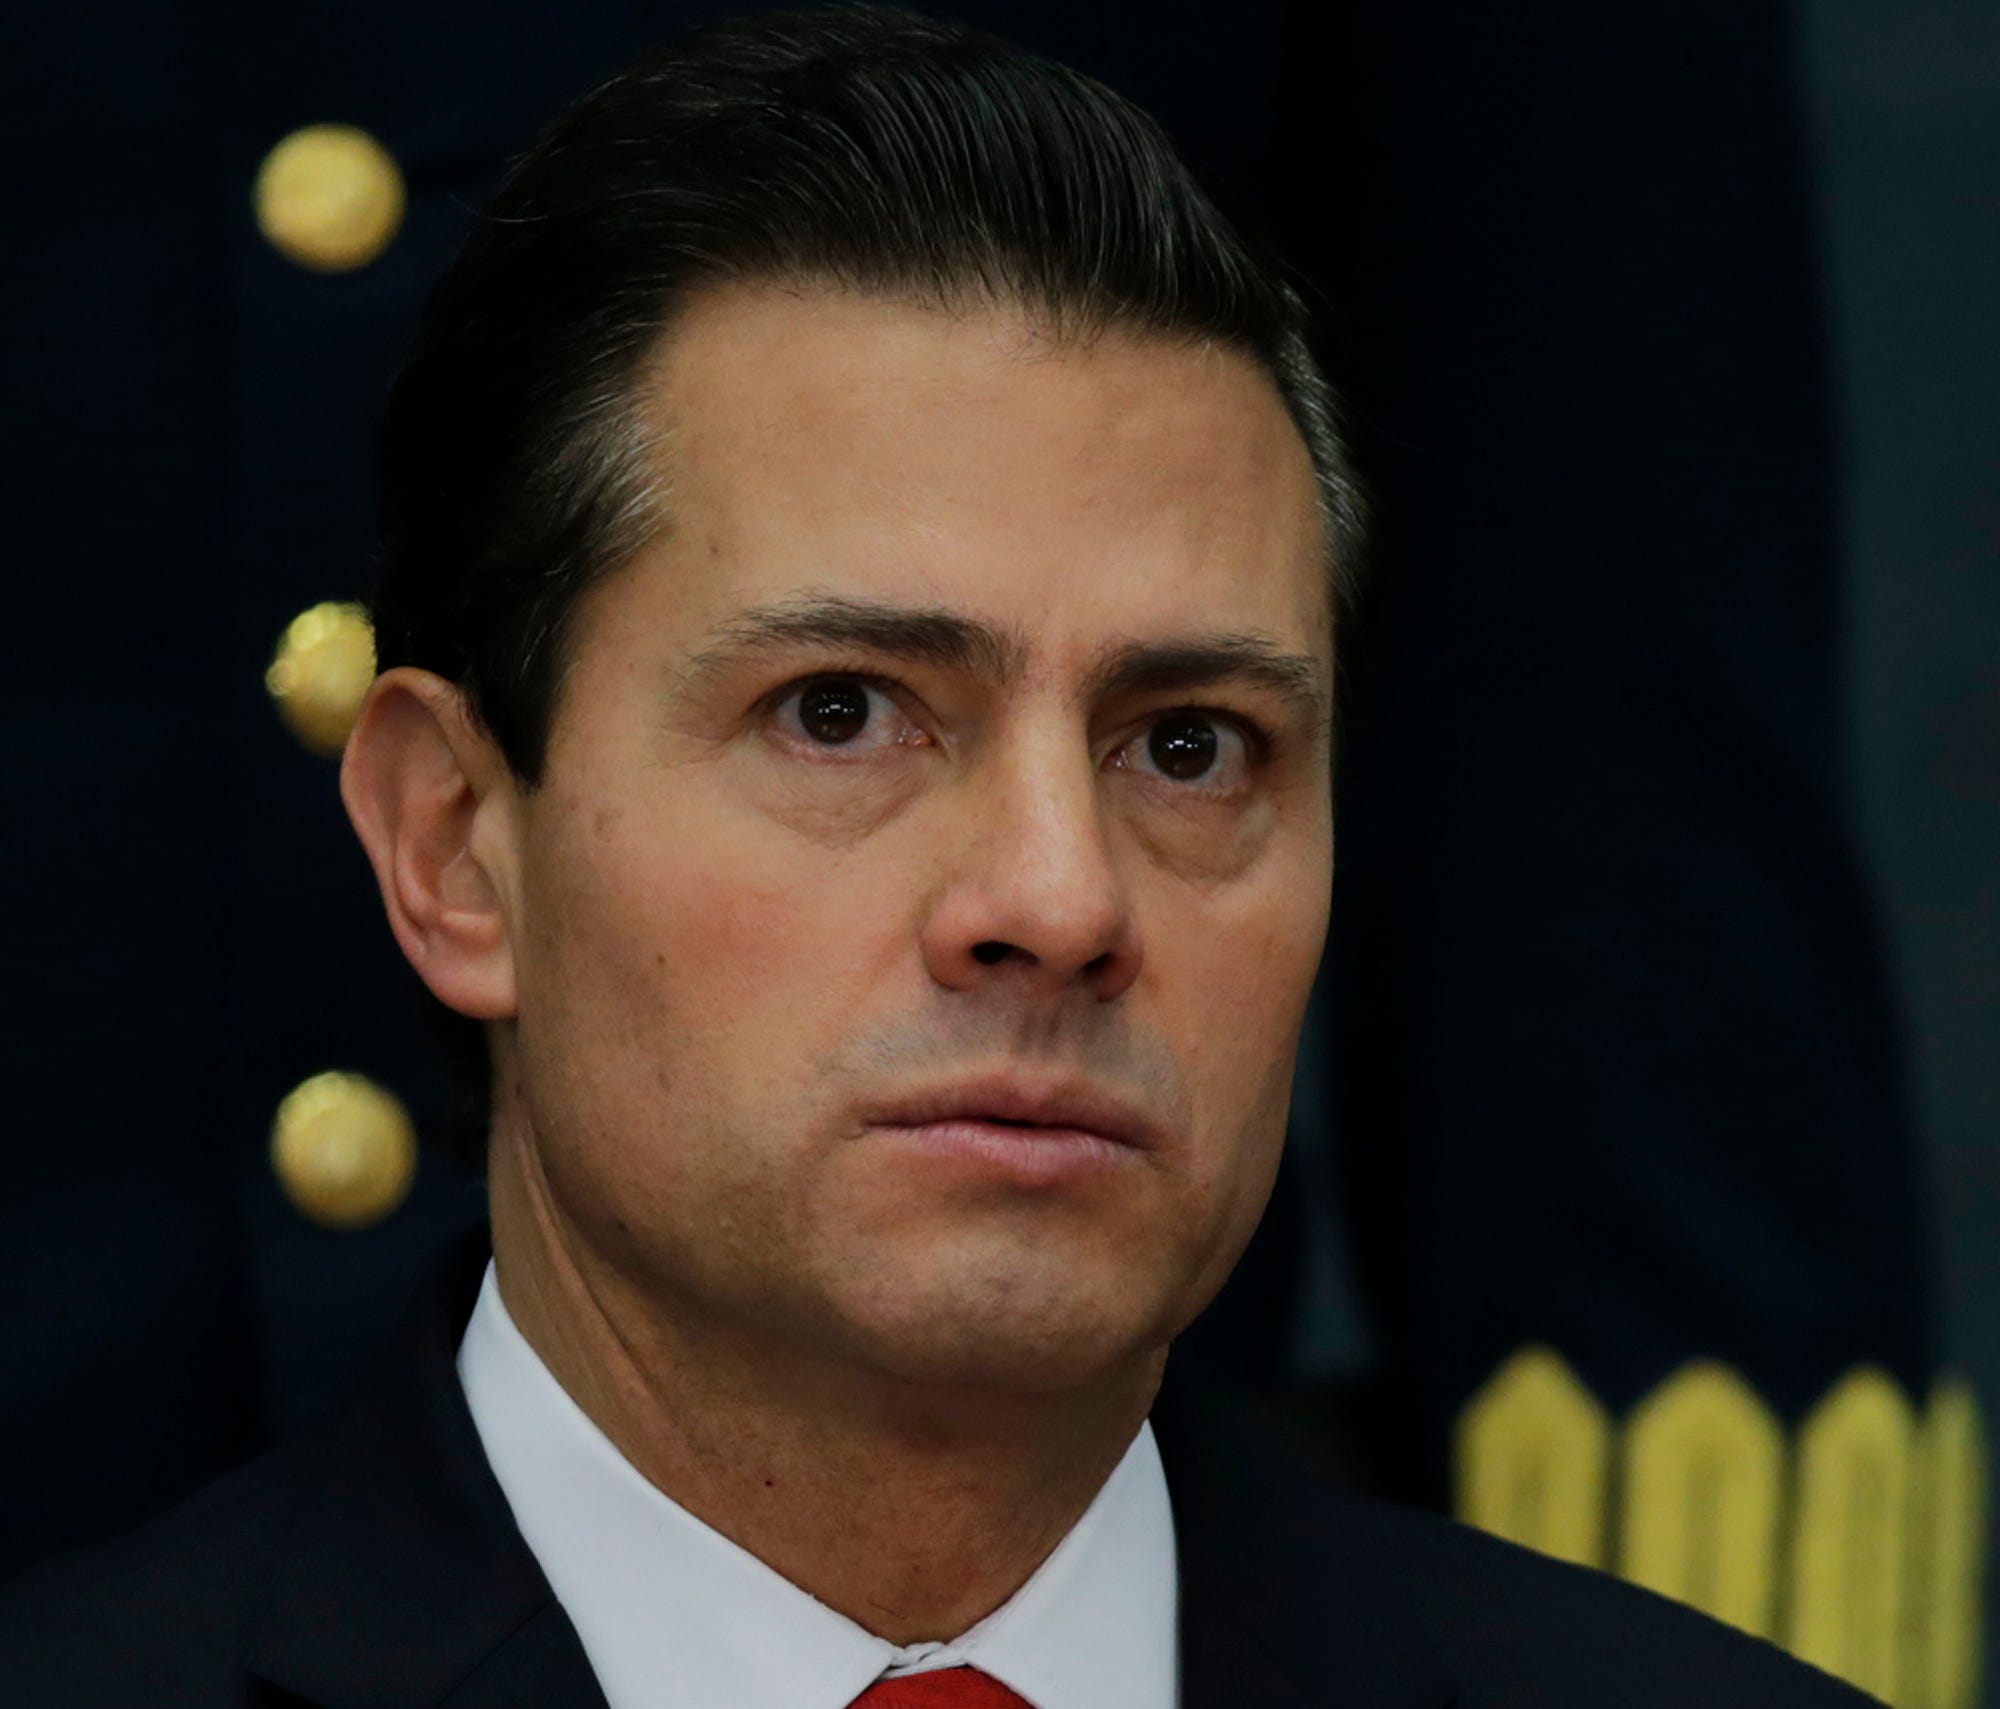 Mexico's President Enrique Pena Nieto during a press conference at Los Pinos presidential residence in Mexico City, on Jan. 23, 2017.